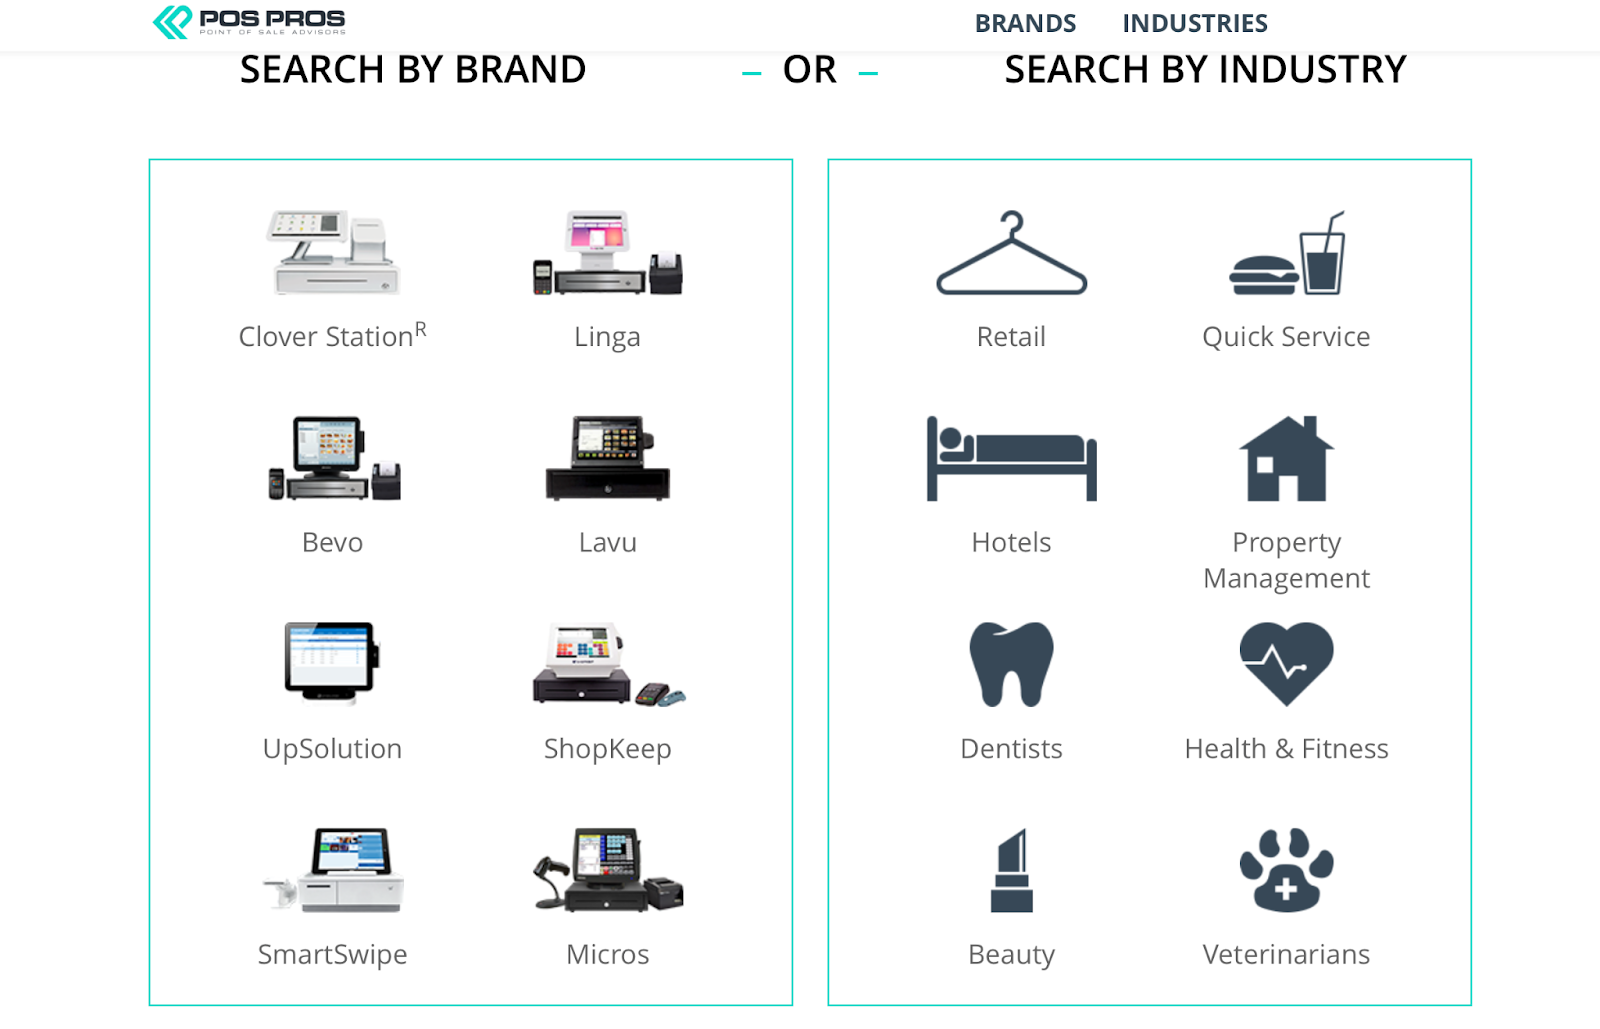 POS Pros POS searchable equipment brand and industry selection